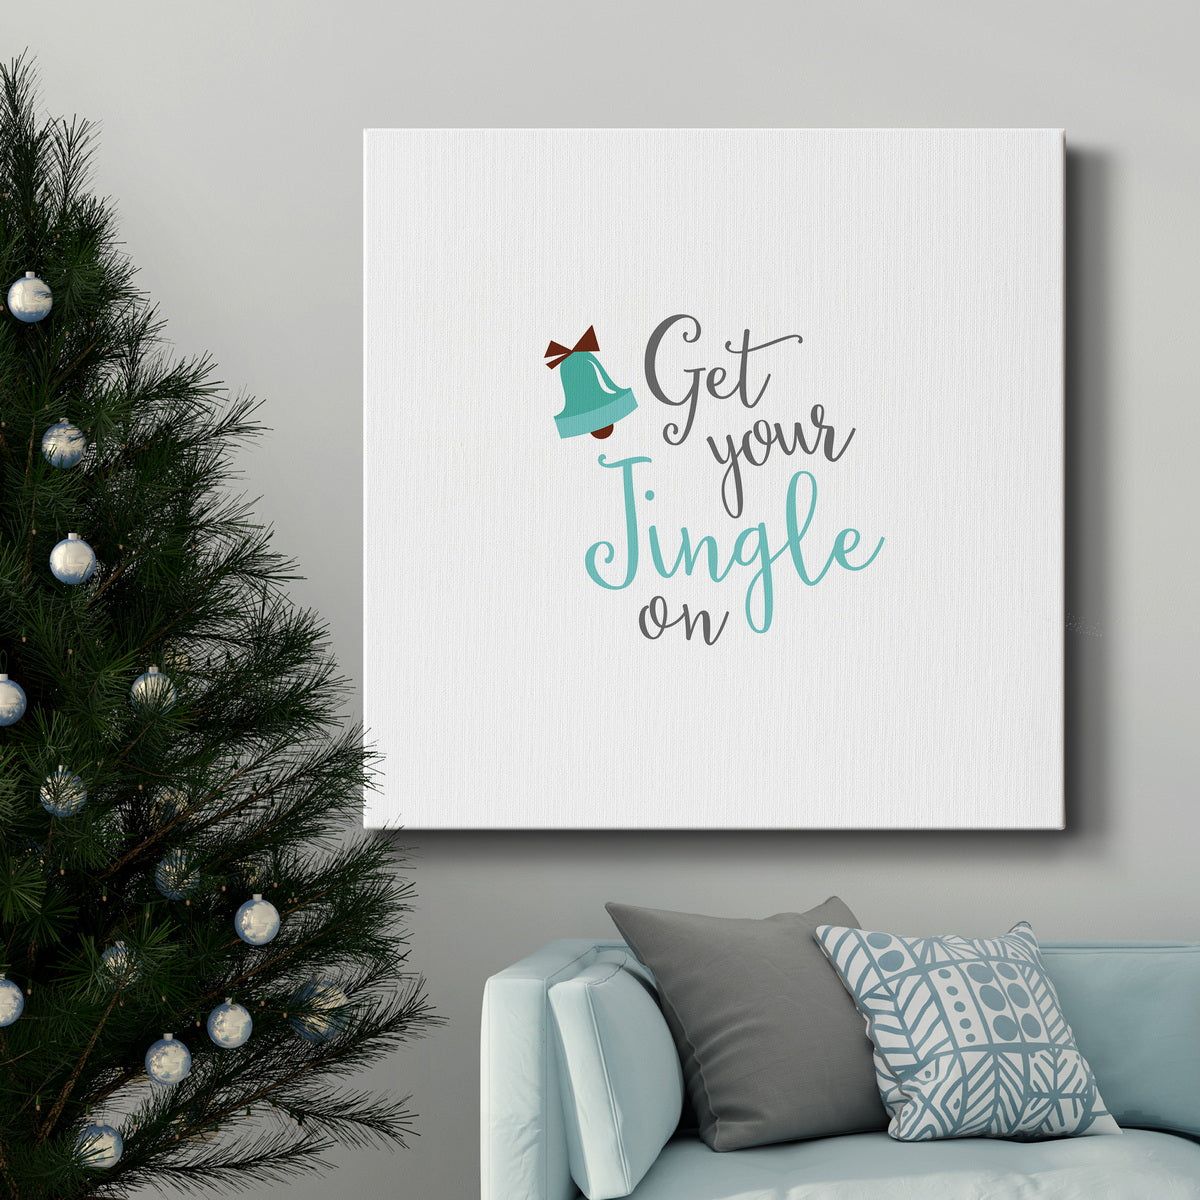 Jingle On-Premium Gallery Wrapped Canvas - Ready to Hang